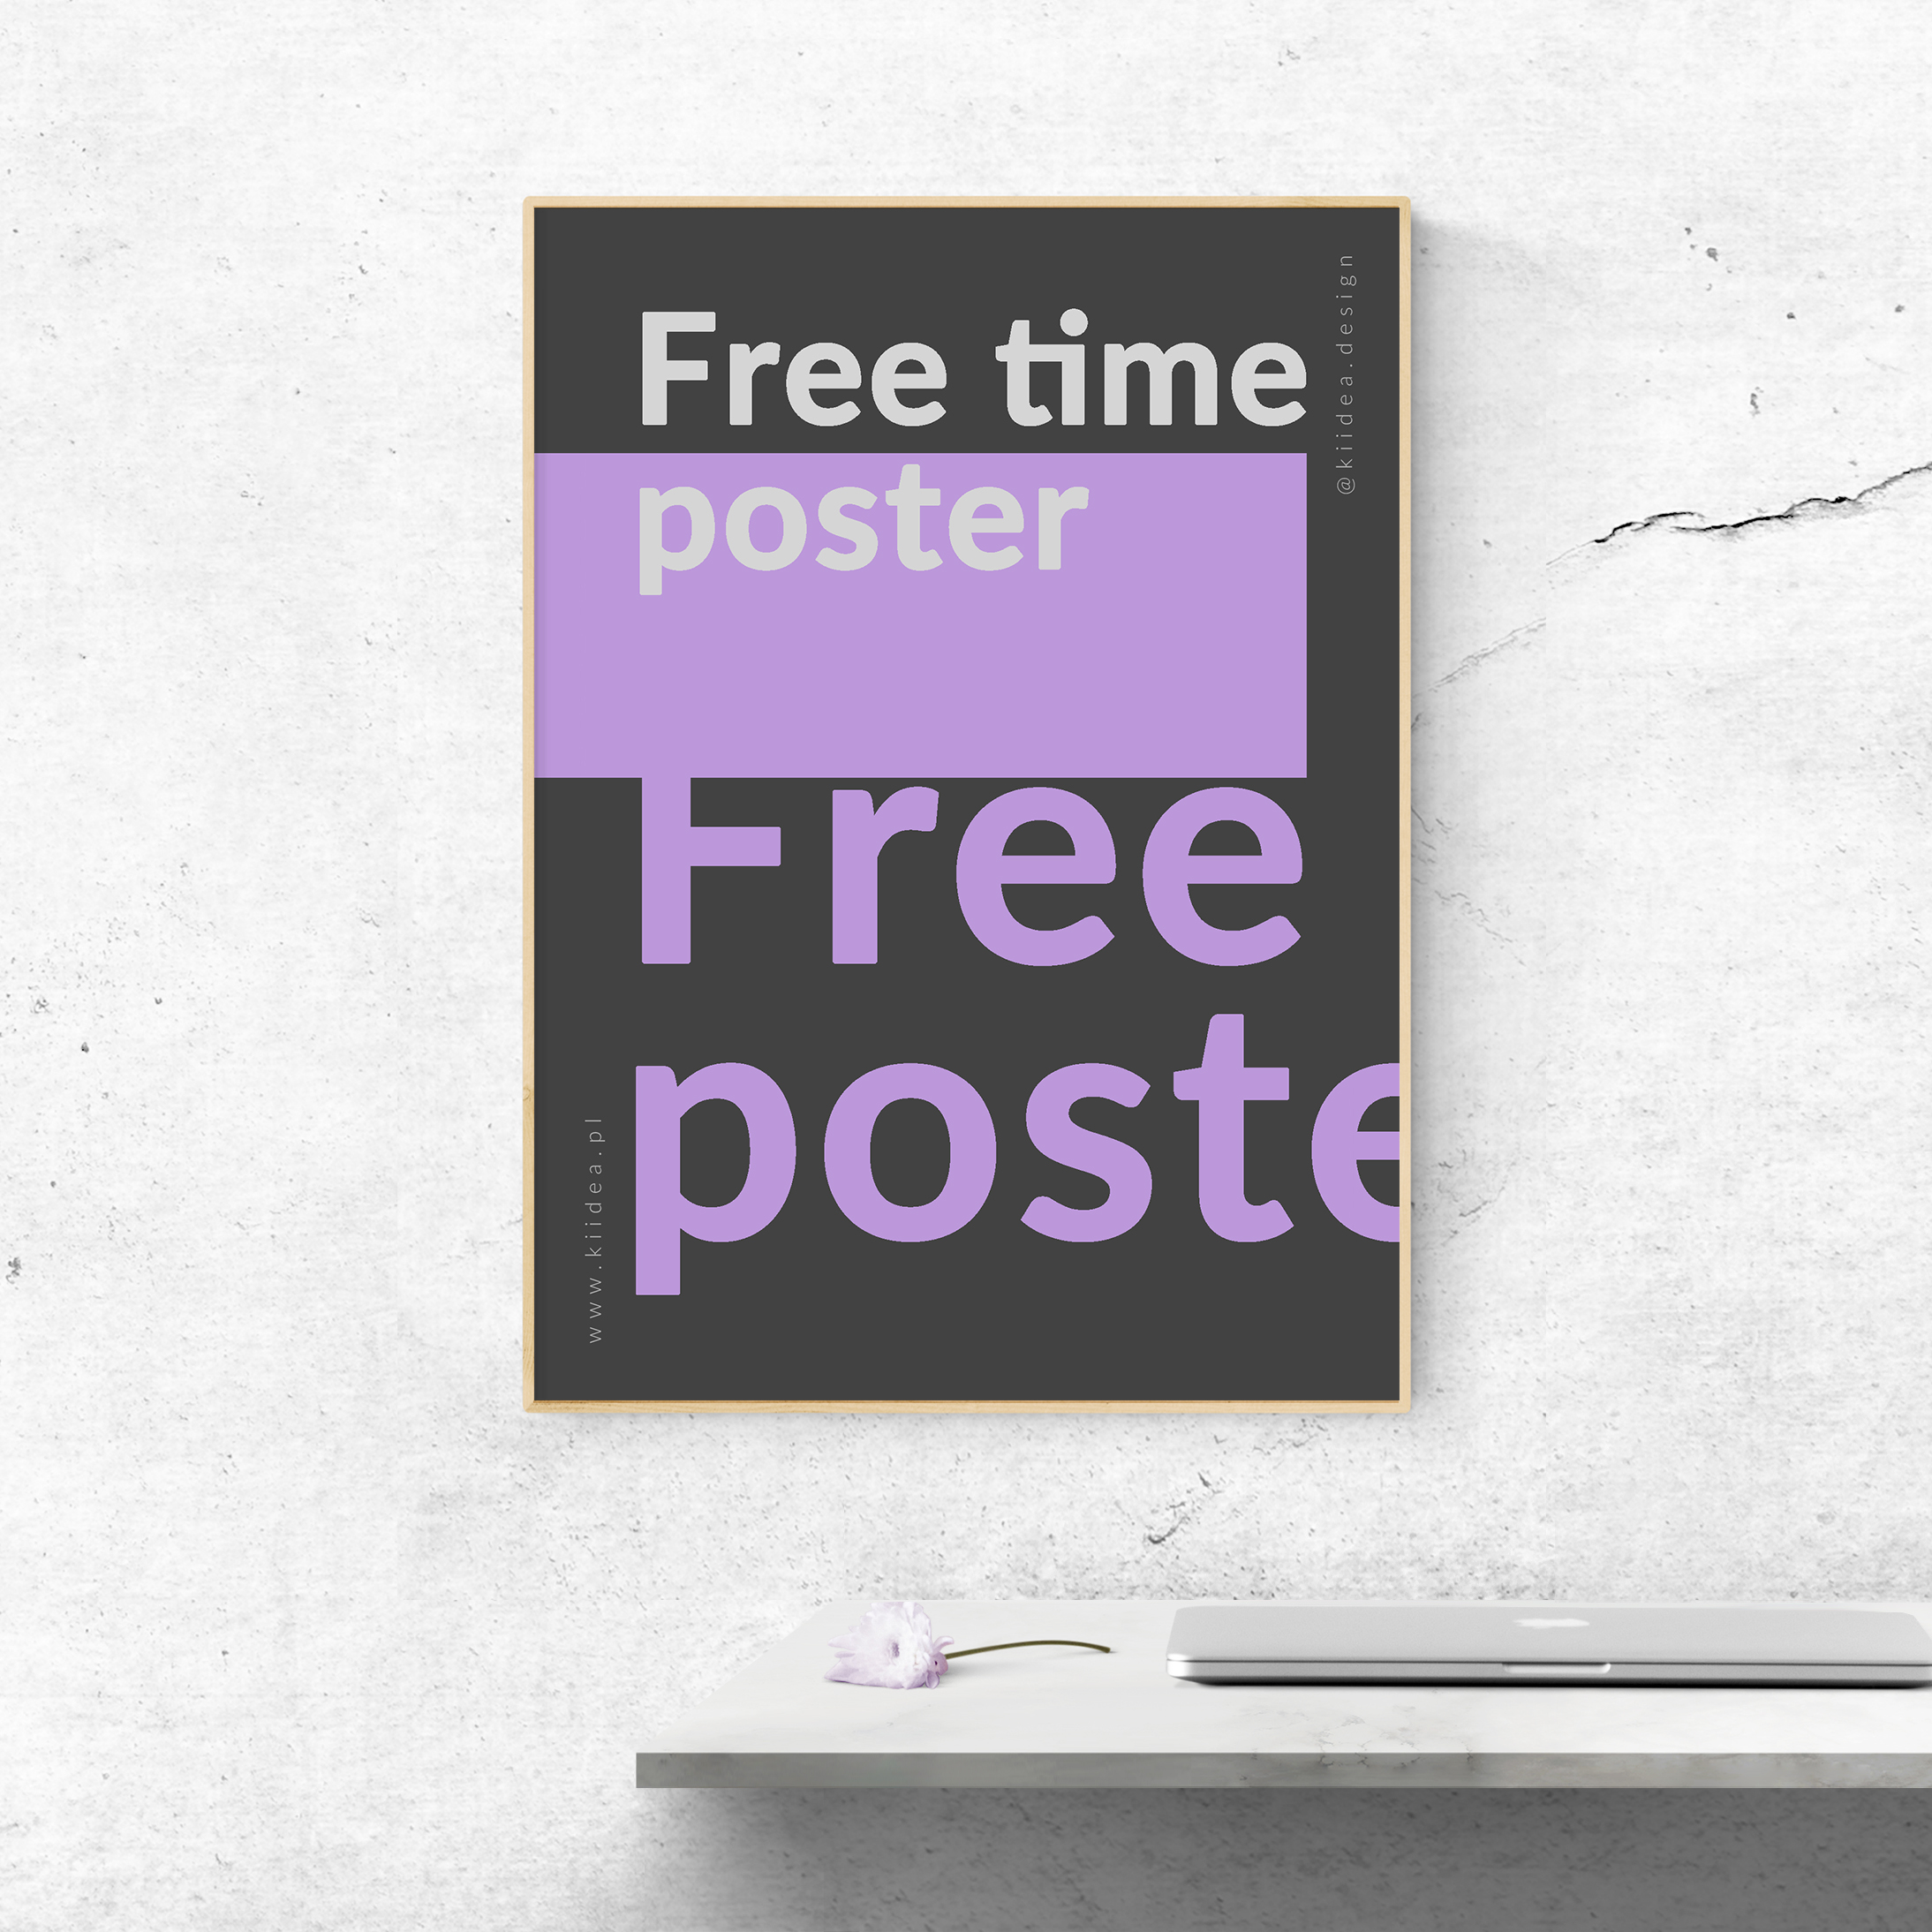 Free time poster